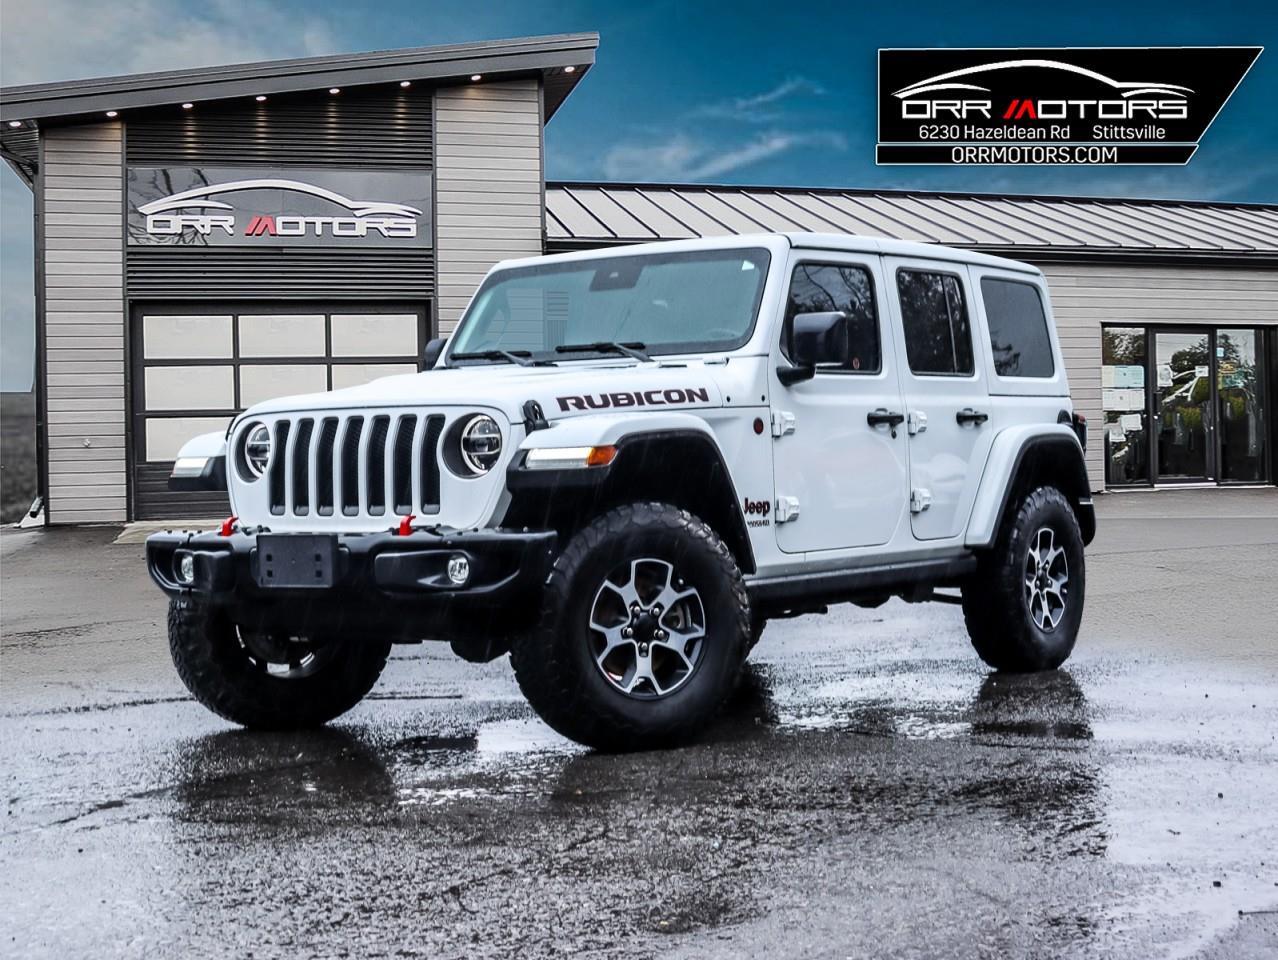 2022 Jeep WRANGLER UNLIMITED Rubicon SOLD CERTIFIED AND IN EXCELLENT CONDITION!